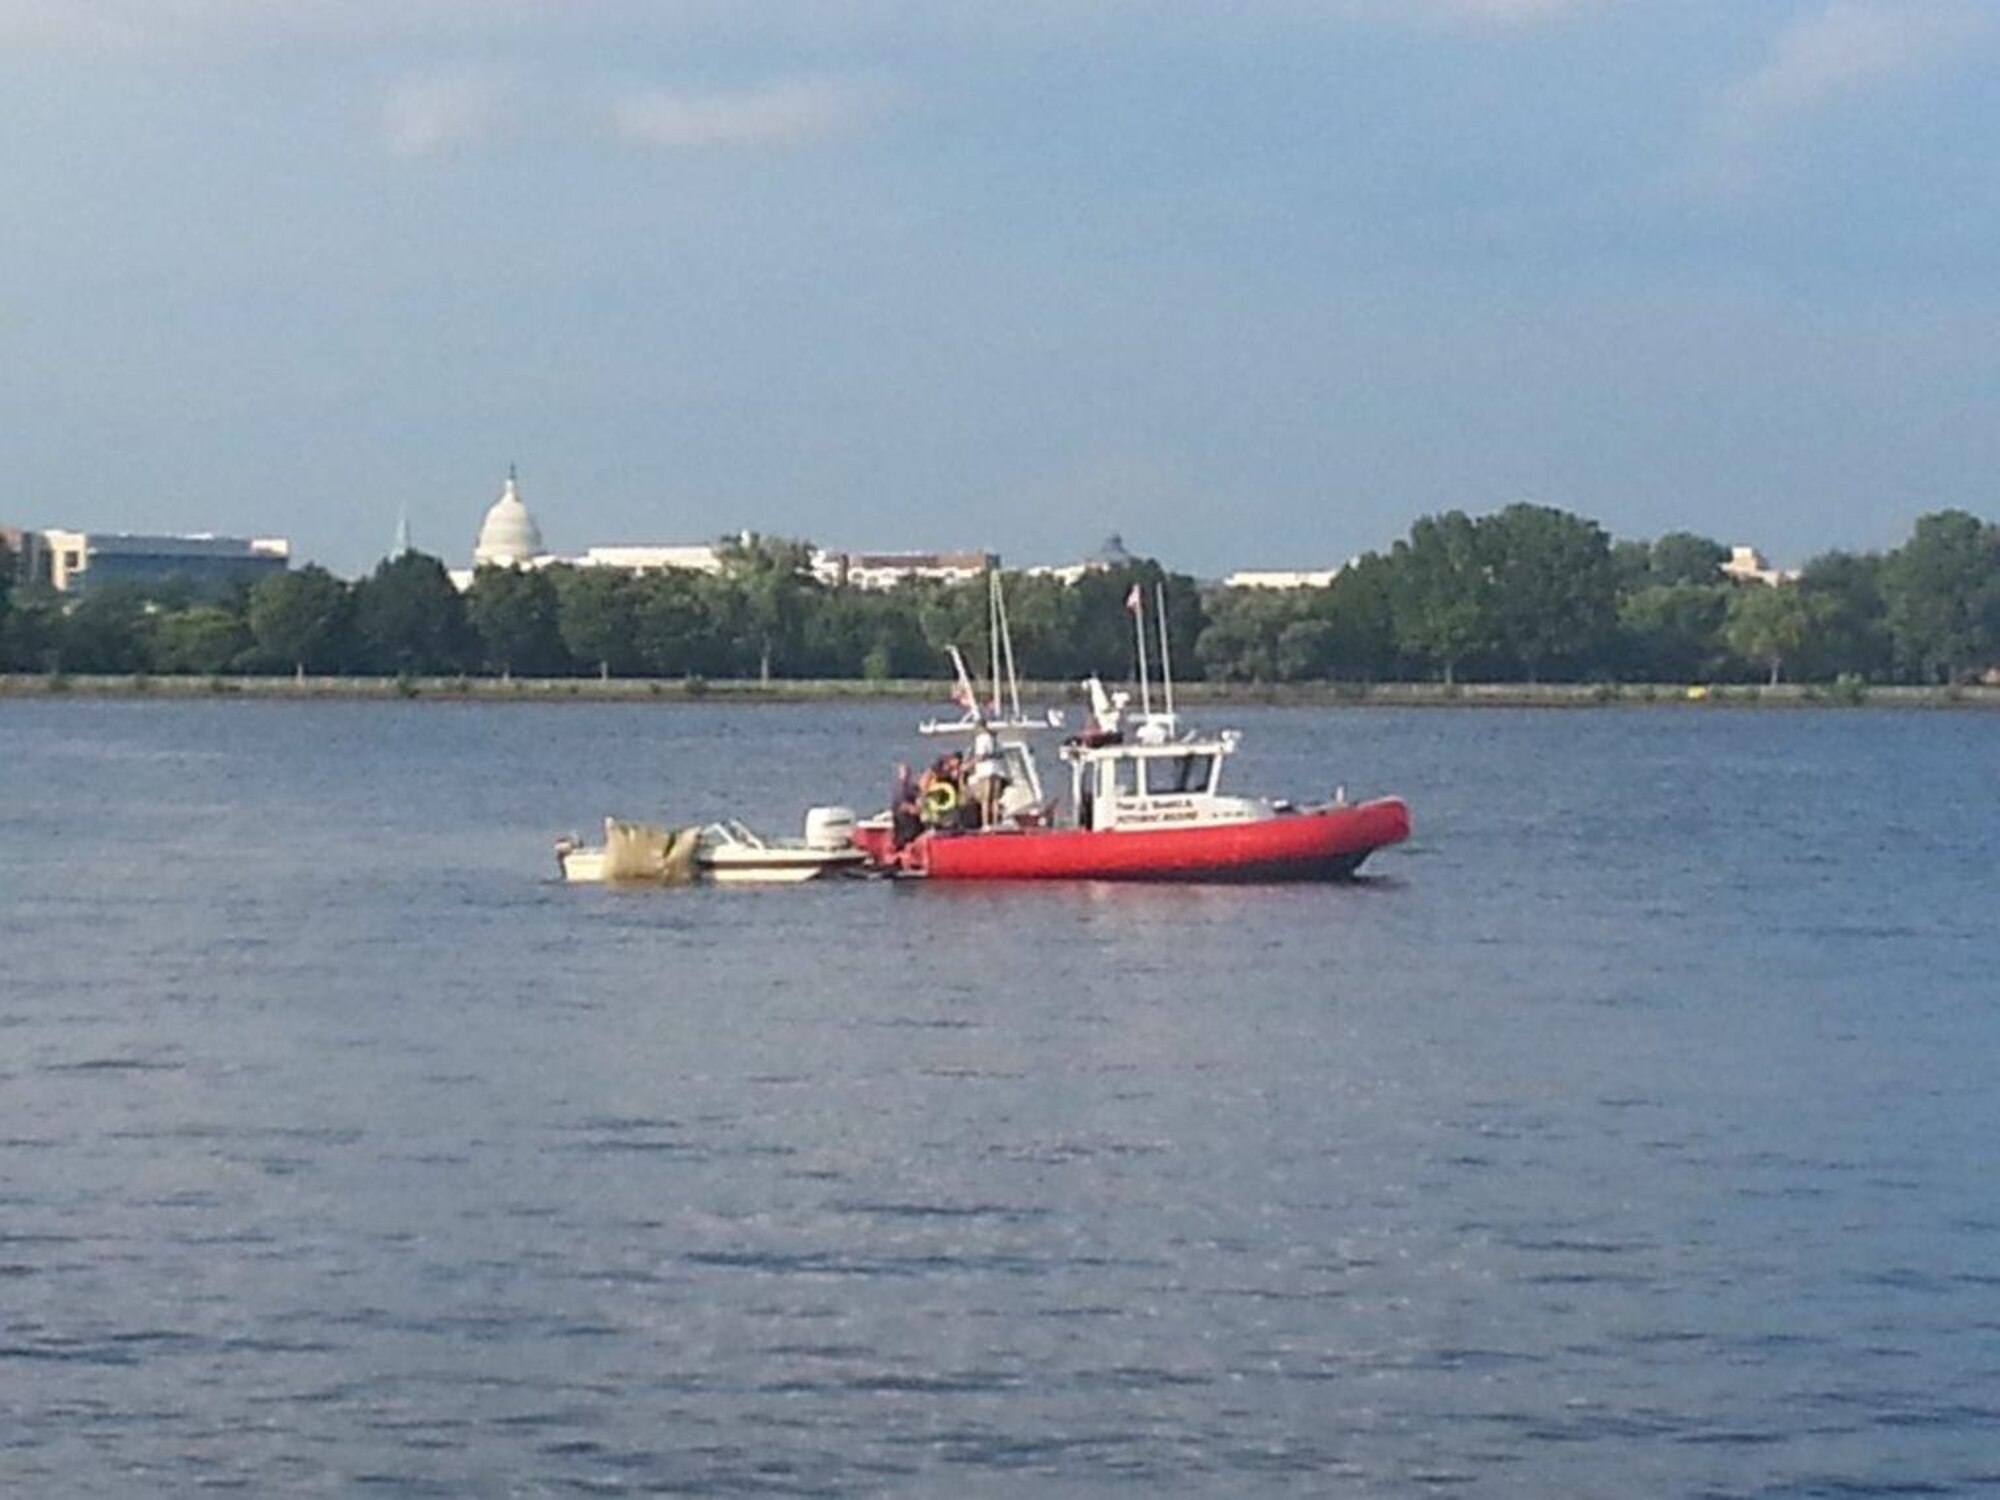 A boat pulls out submerged vessel from the Potomac River in Washington D.C. This photo was captured a couple days after Col. Richard Poston helped save a young girl from drowning. She, along with the other four members, was aboard the vessel when it went under. (Courtesy photo/U.S. Air Force Col. Richard Poston)